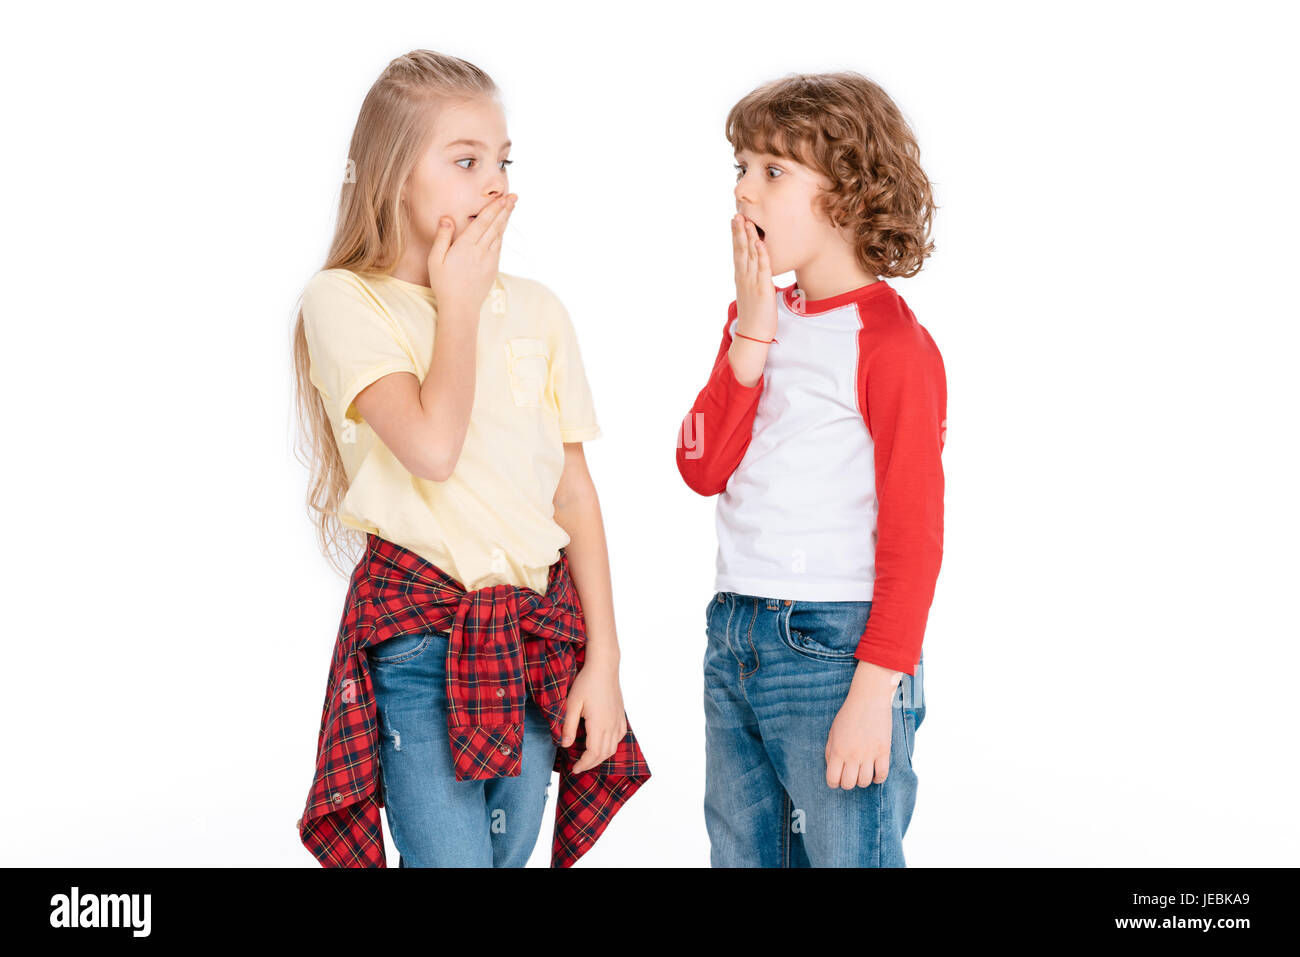 Surprising boy and girl with shocked expression isolated on white Stock Photo